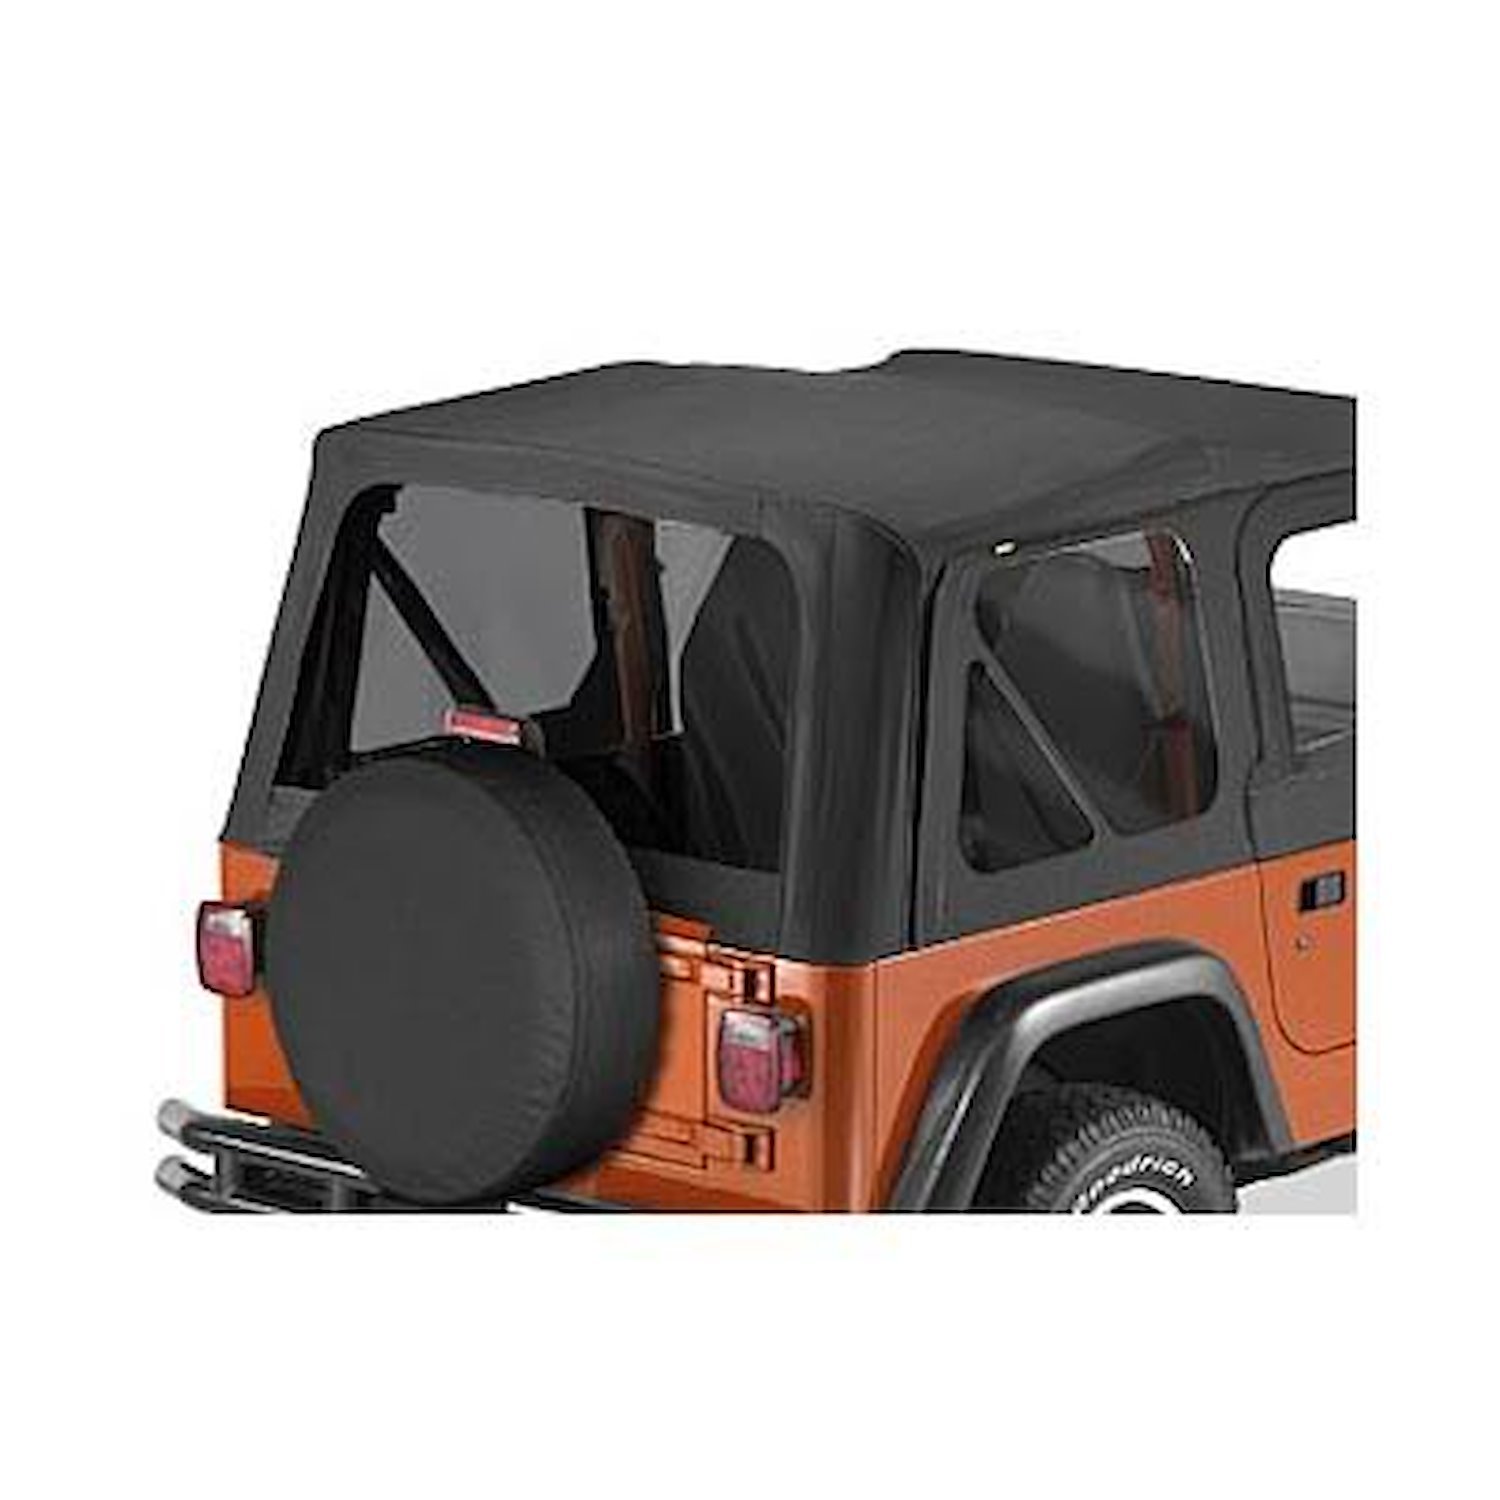 Window Replacement Set, Black Denim, Incl. 2 Side Windows And 1 Rear Window, Fits Replace-A-Top PN[51121/51124/51127],